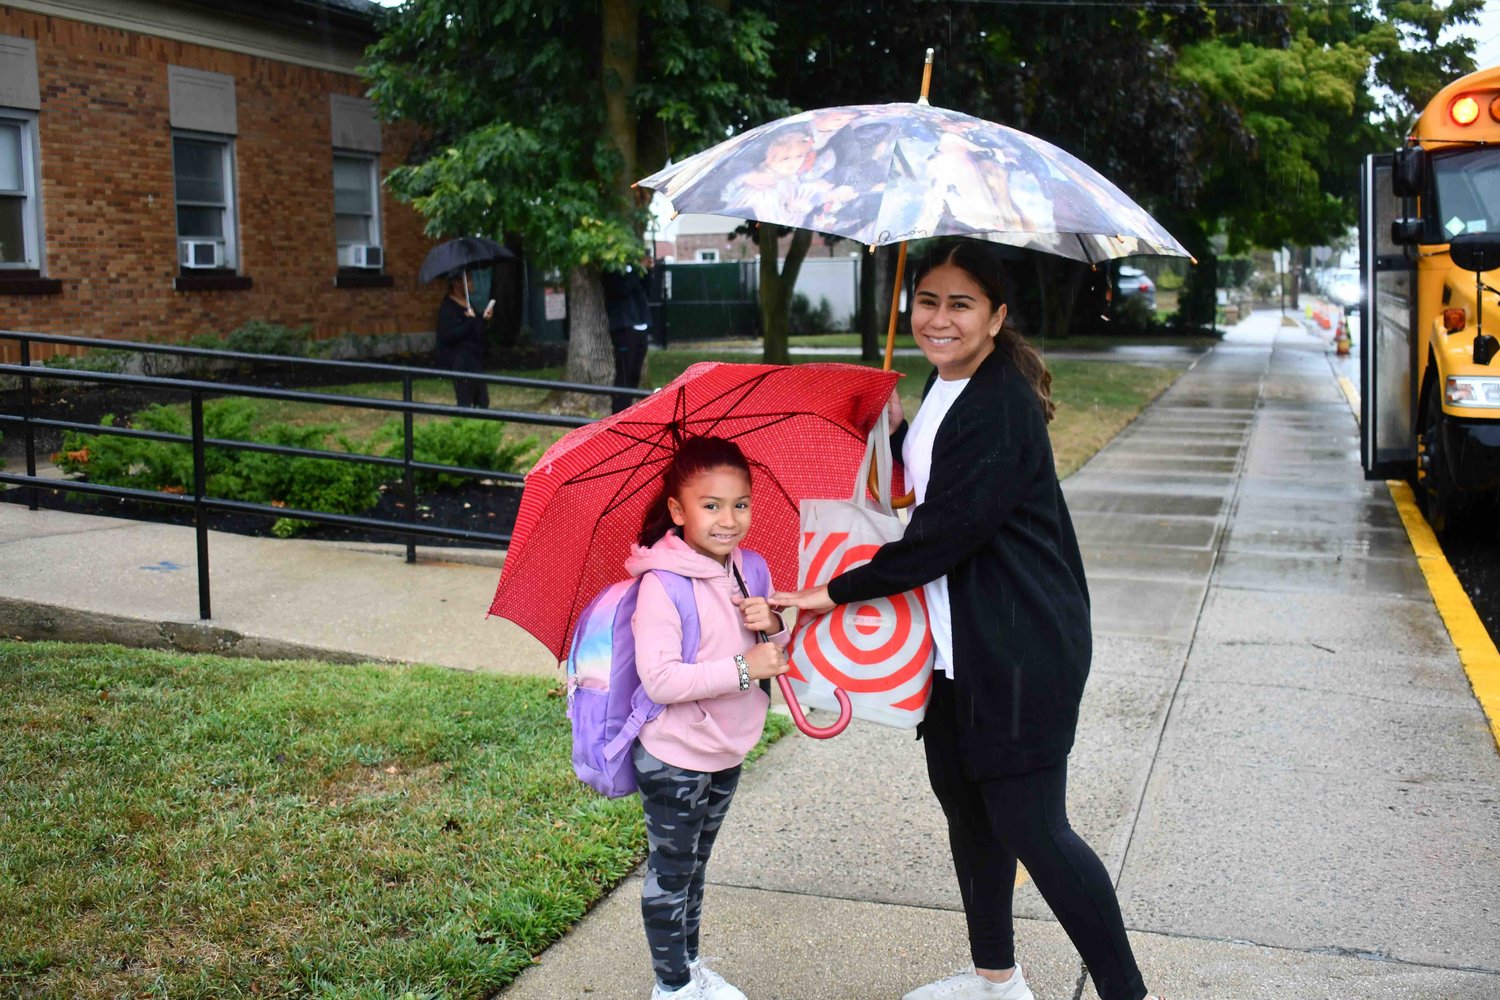 7-year-old Victoria Canales was brought to Maurice W. Downing School by her mother Ana to start her first day of second grade.